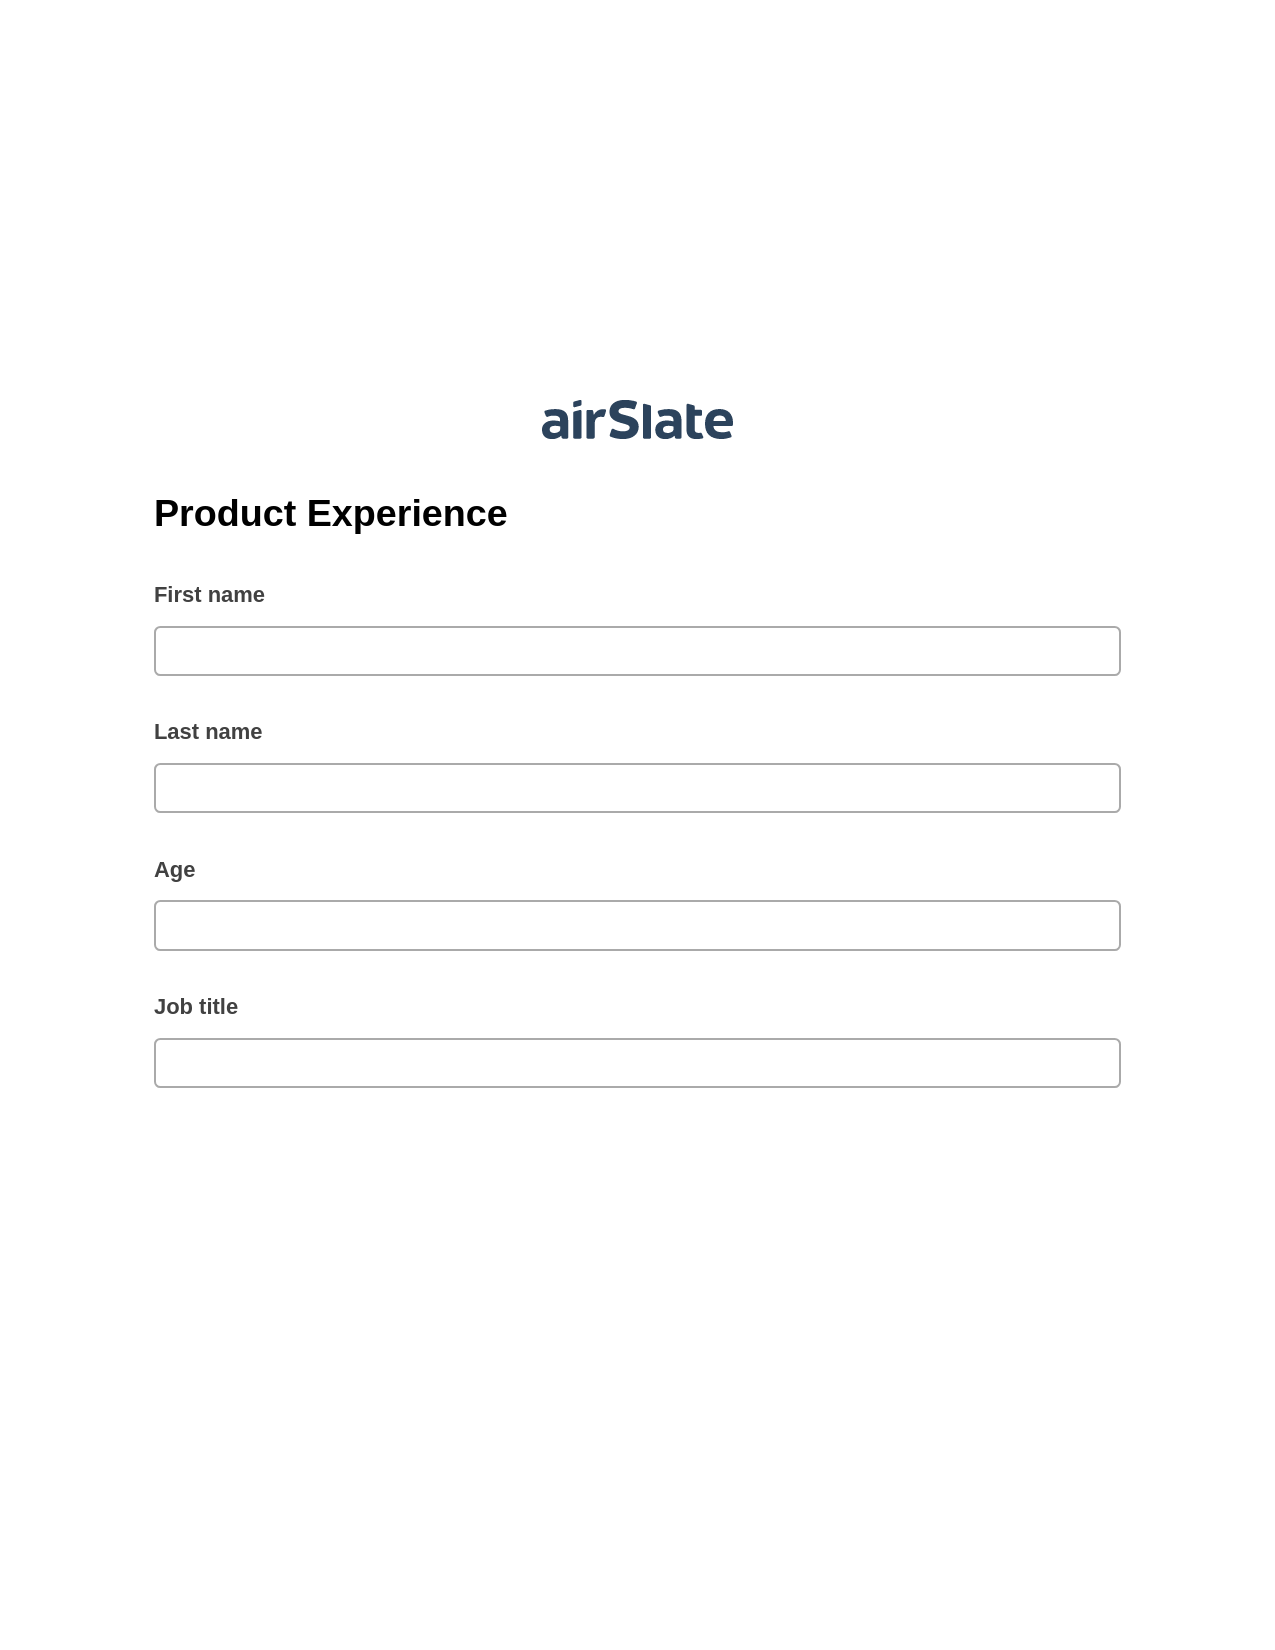 Multirole Product Experience Pre-fill from CSV File Bot, Create slate from another Flow Bot, Export to WebMerge Bot